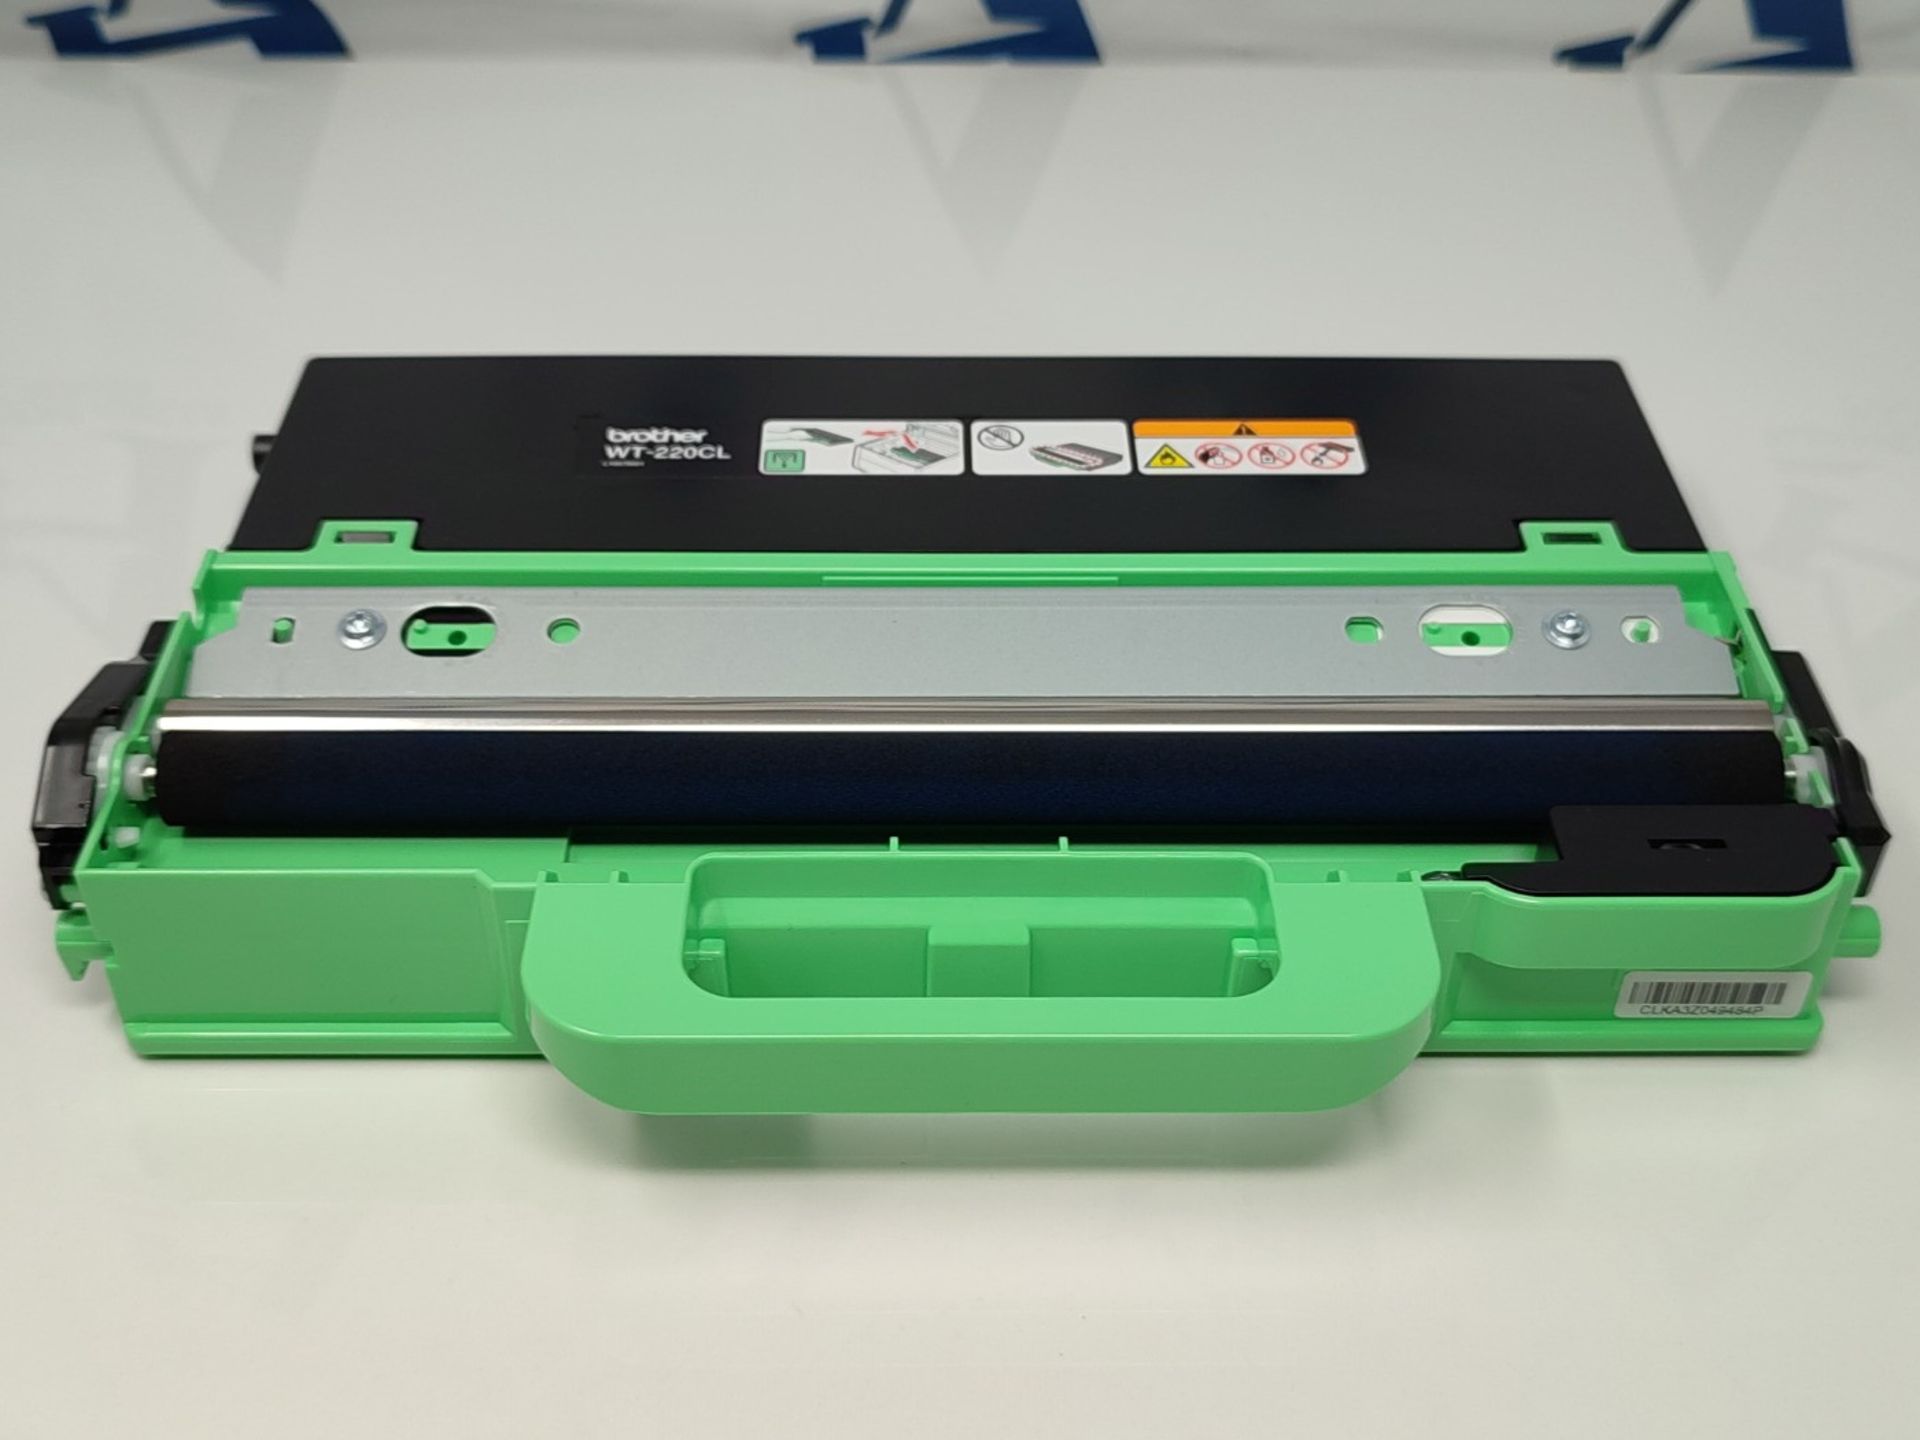 Brother WT220CL - Waste toner collector - for Brother DCP-9015, 9020, 9022, HL-3140, 3 - Image 2 of 2